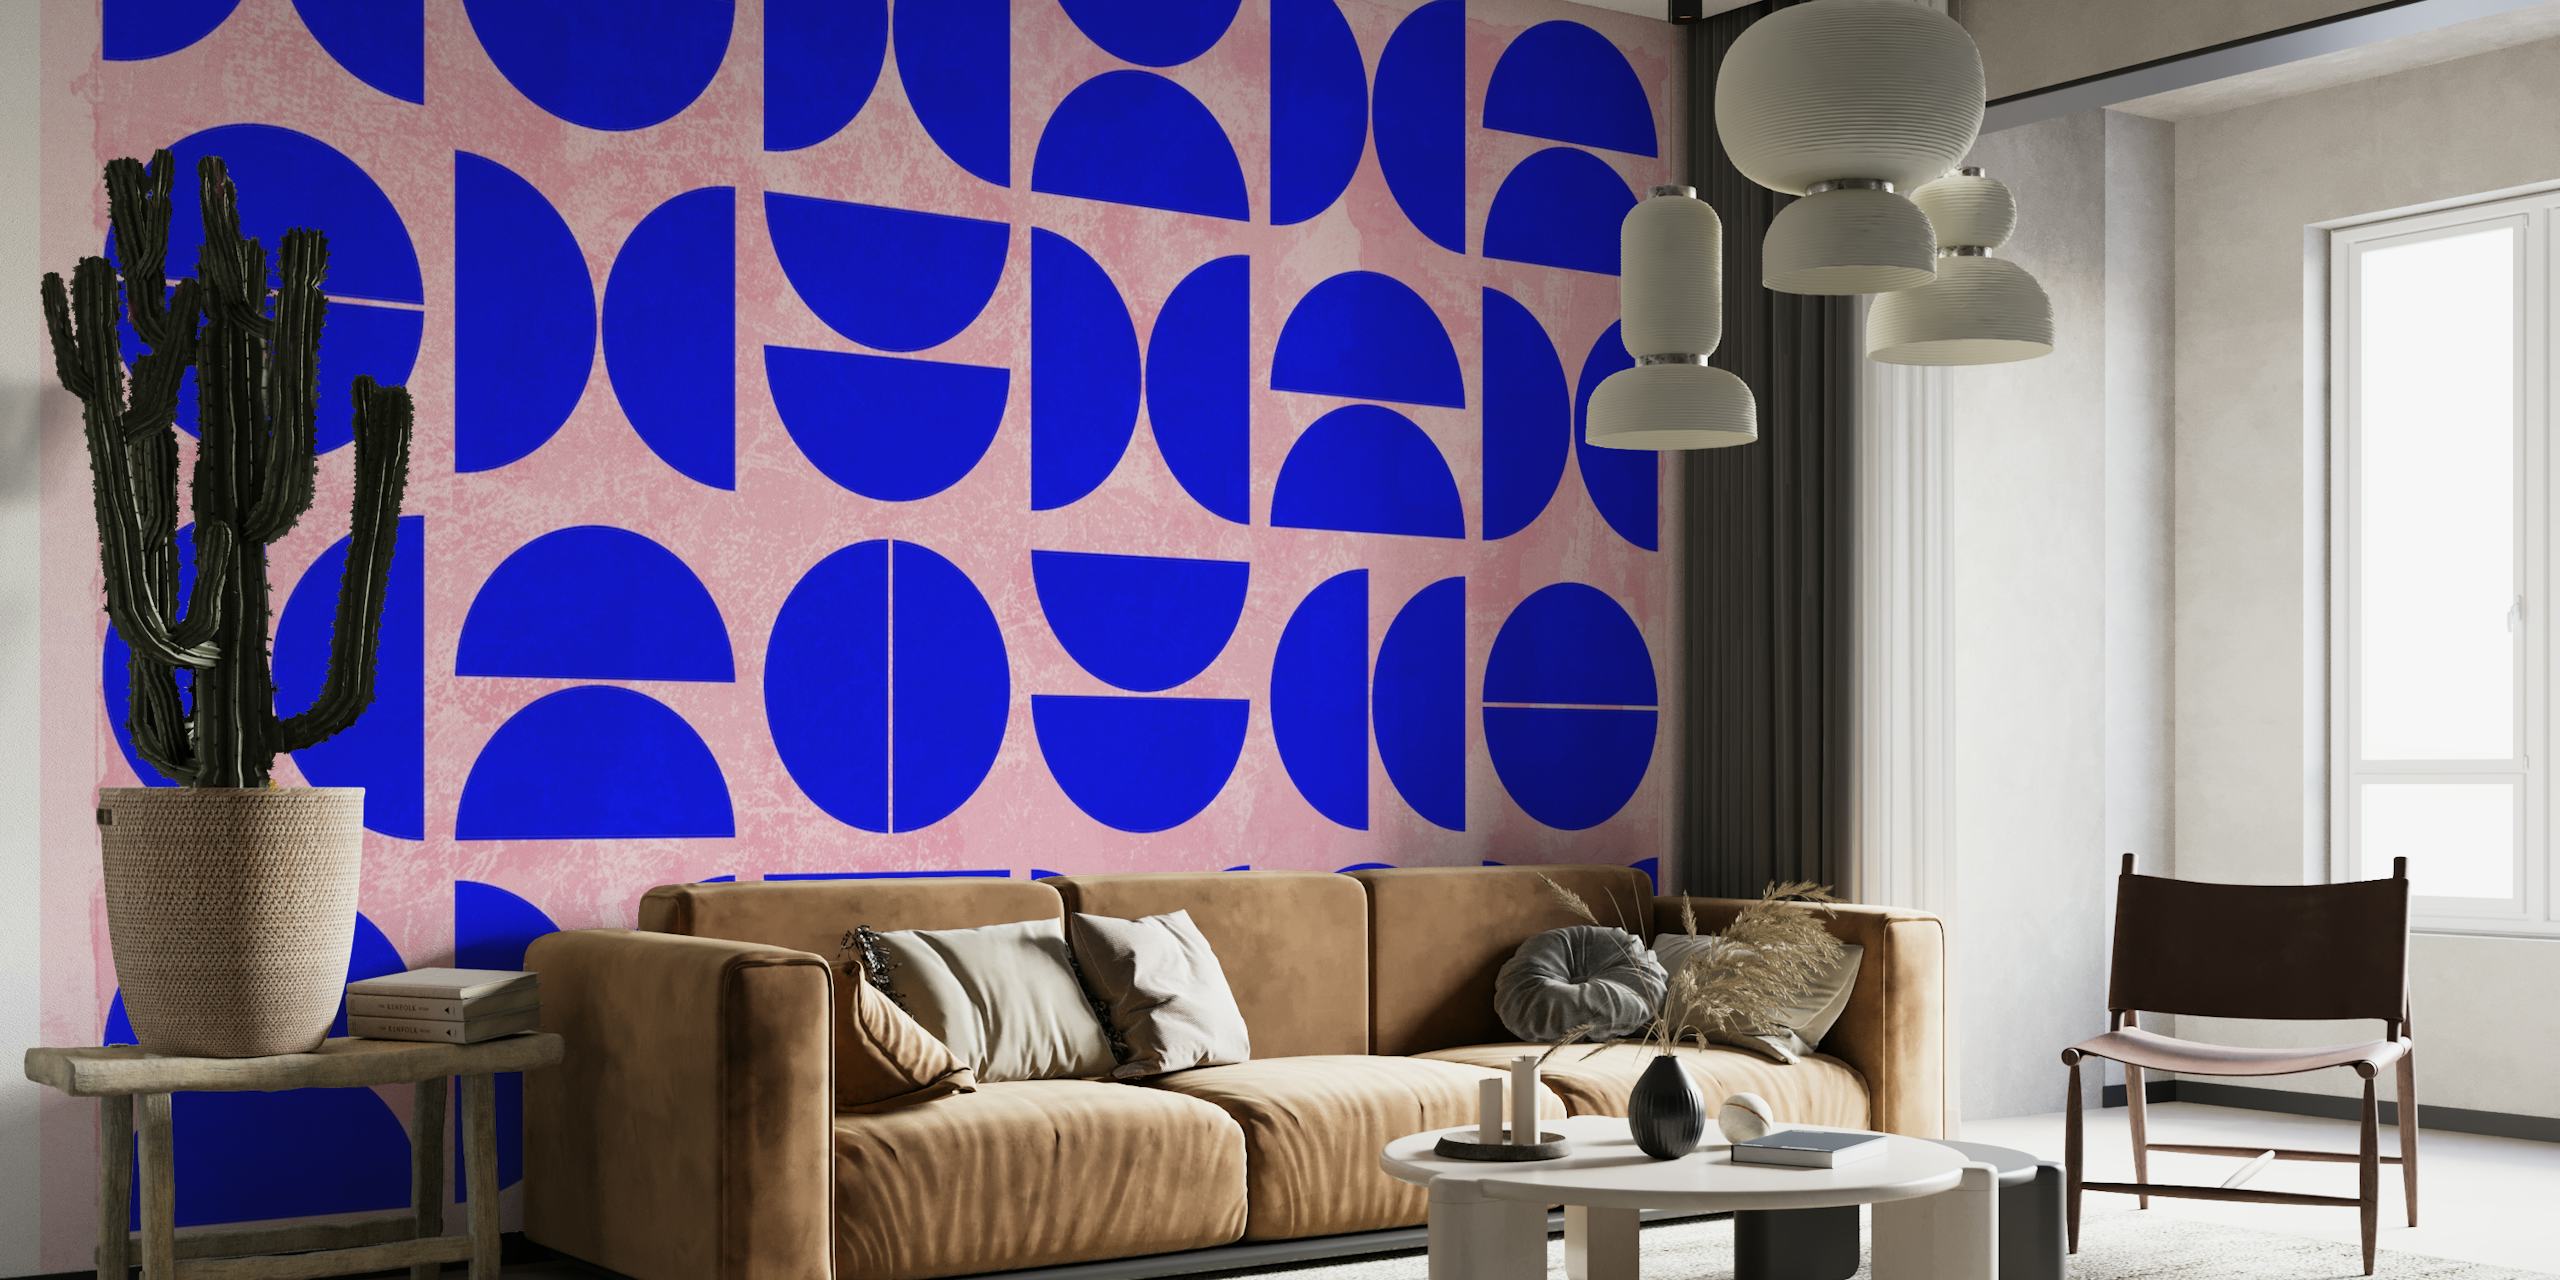 Abstract blue geometric shapes on a neutral wall mural for modern interior decor